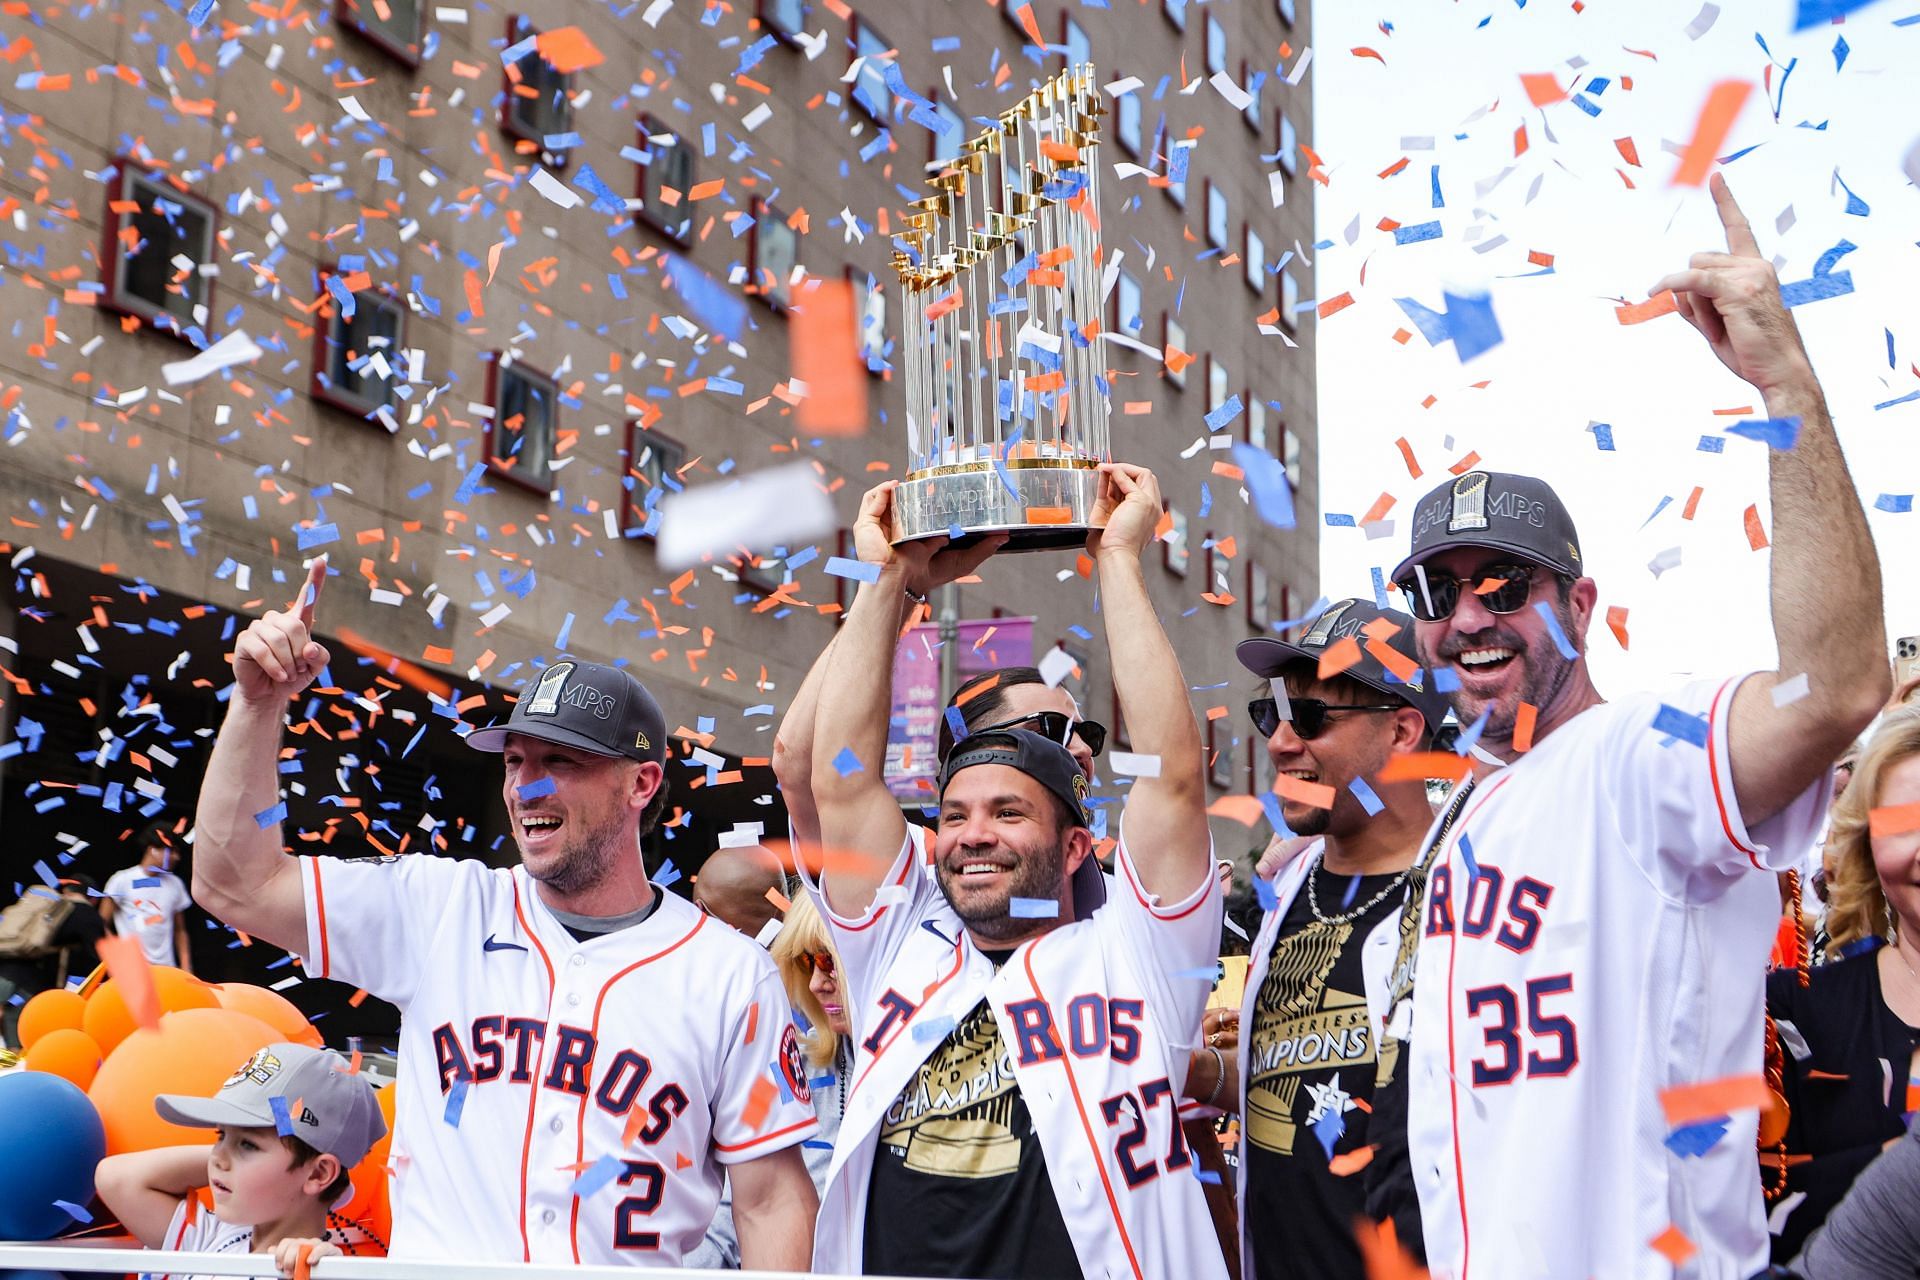 Houston Astros schedule: How will the Houston Astros be affected